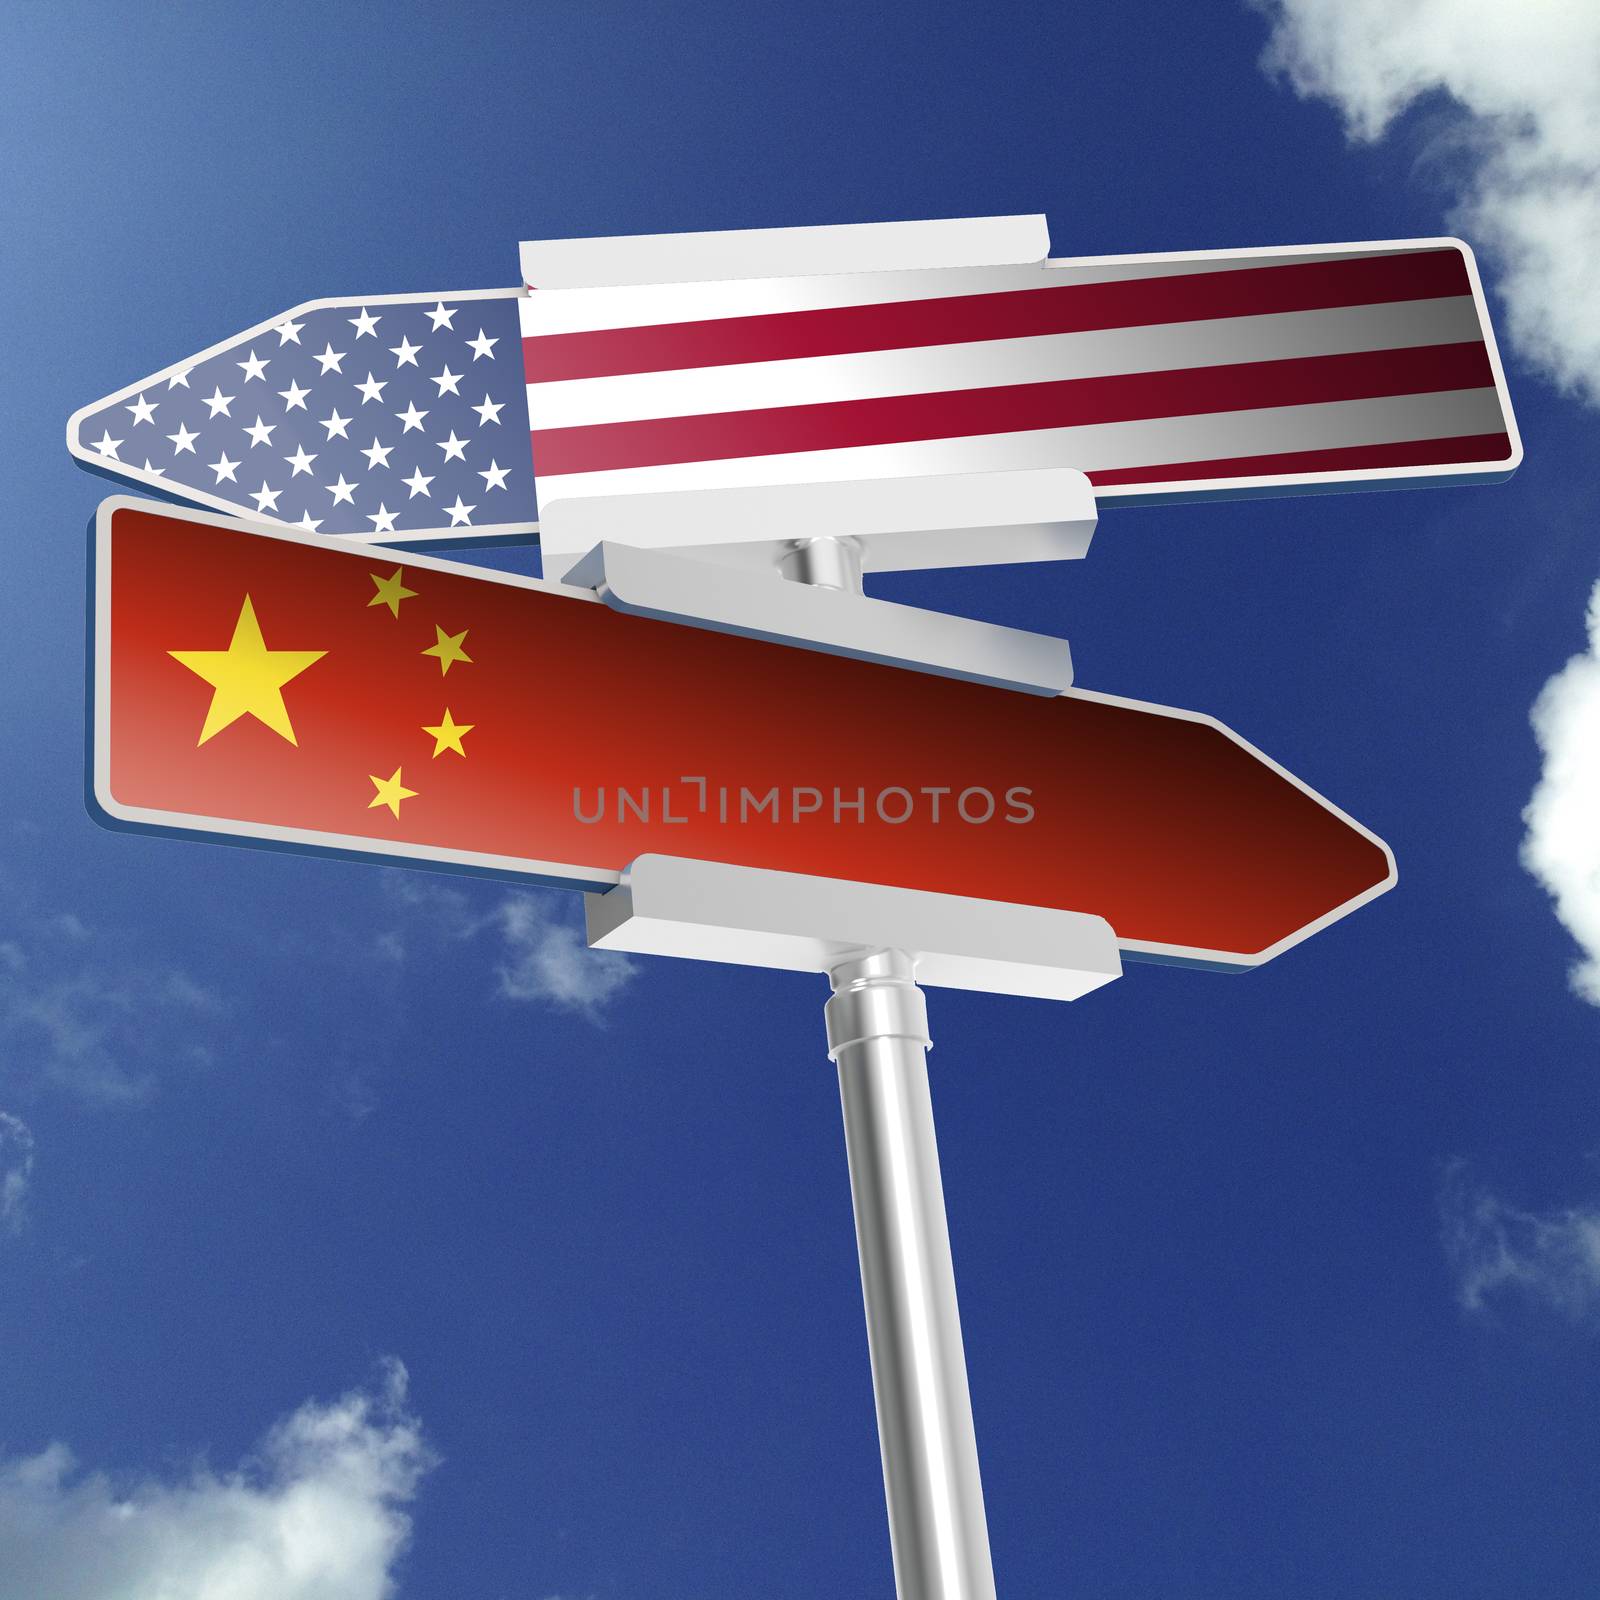 Traffic sign with USA and China flags by tang90246